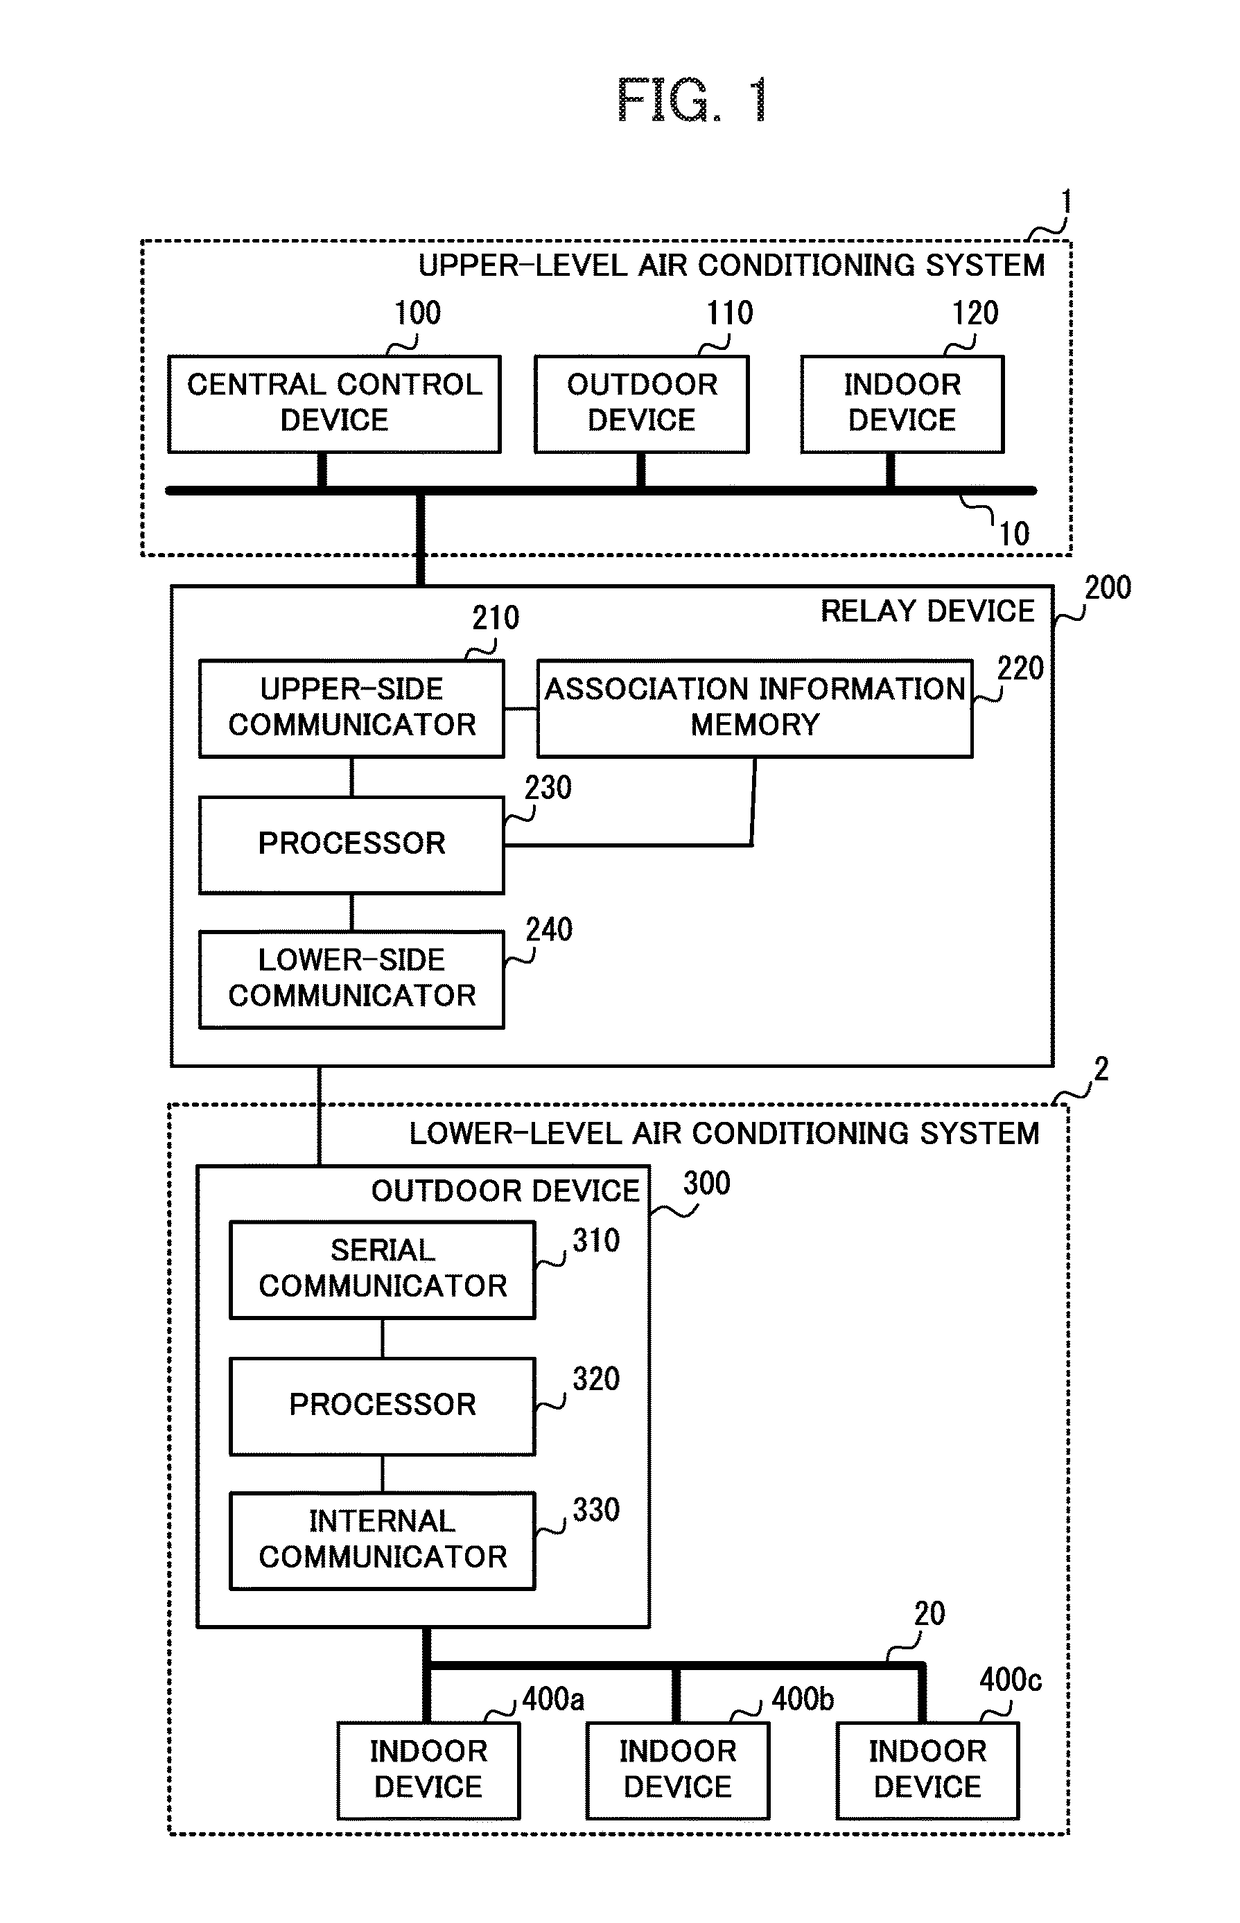 Relay device and air conditioning system